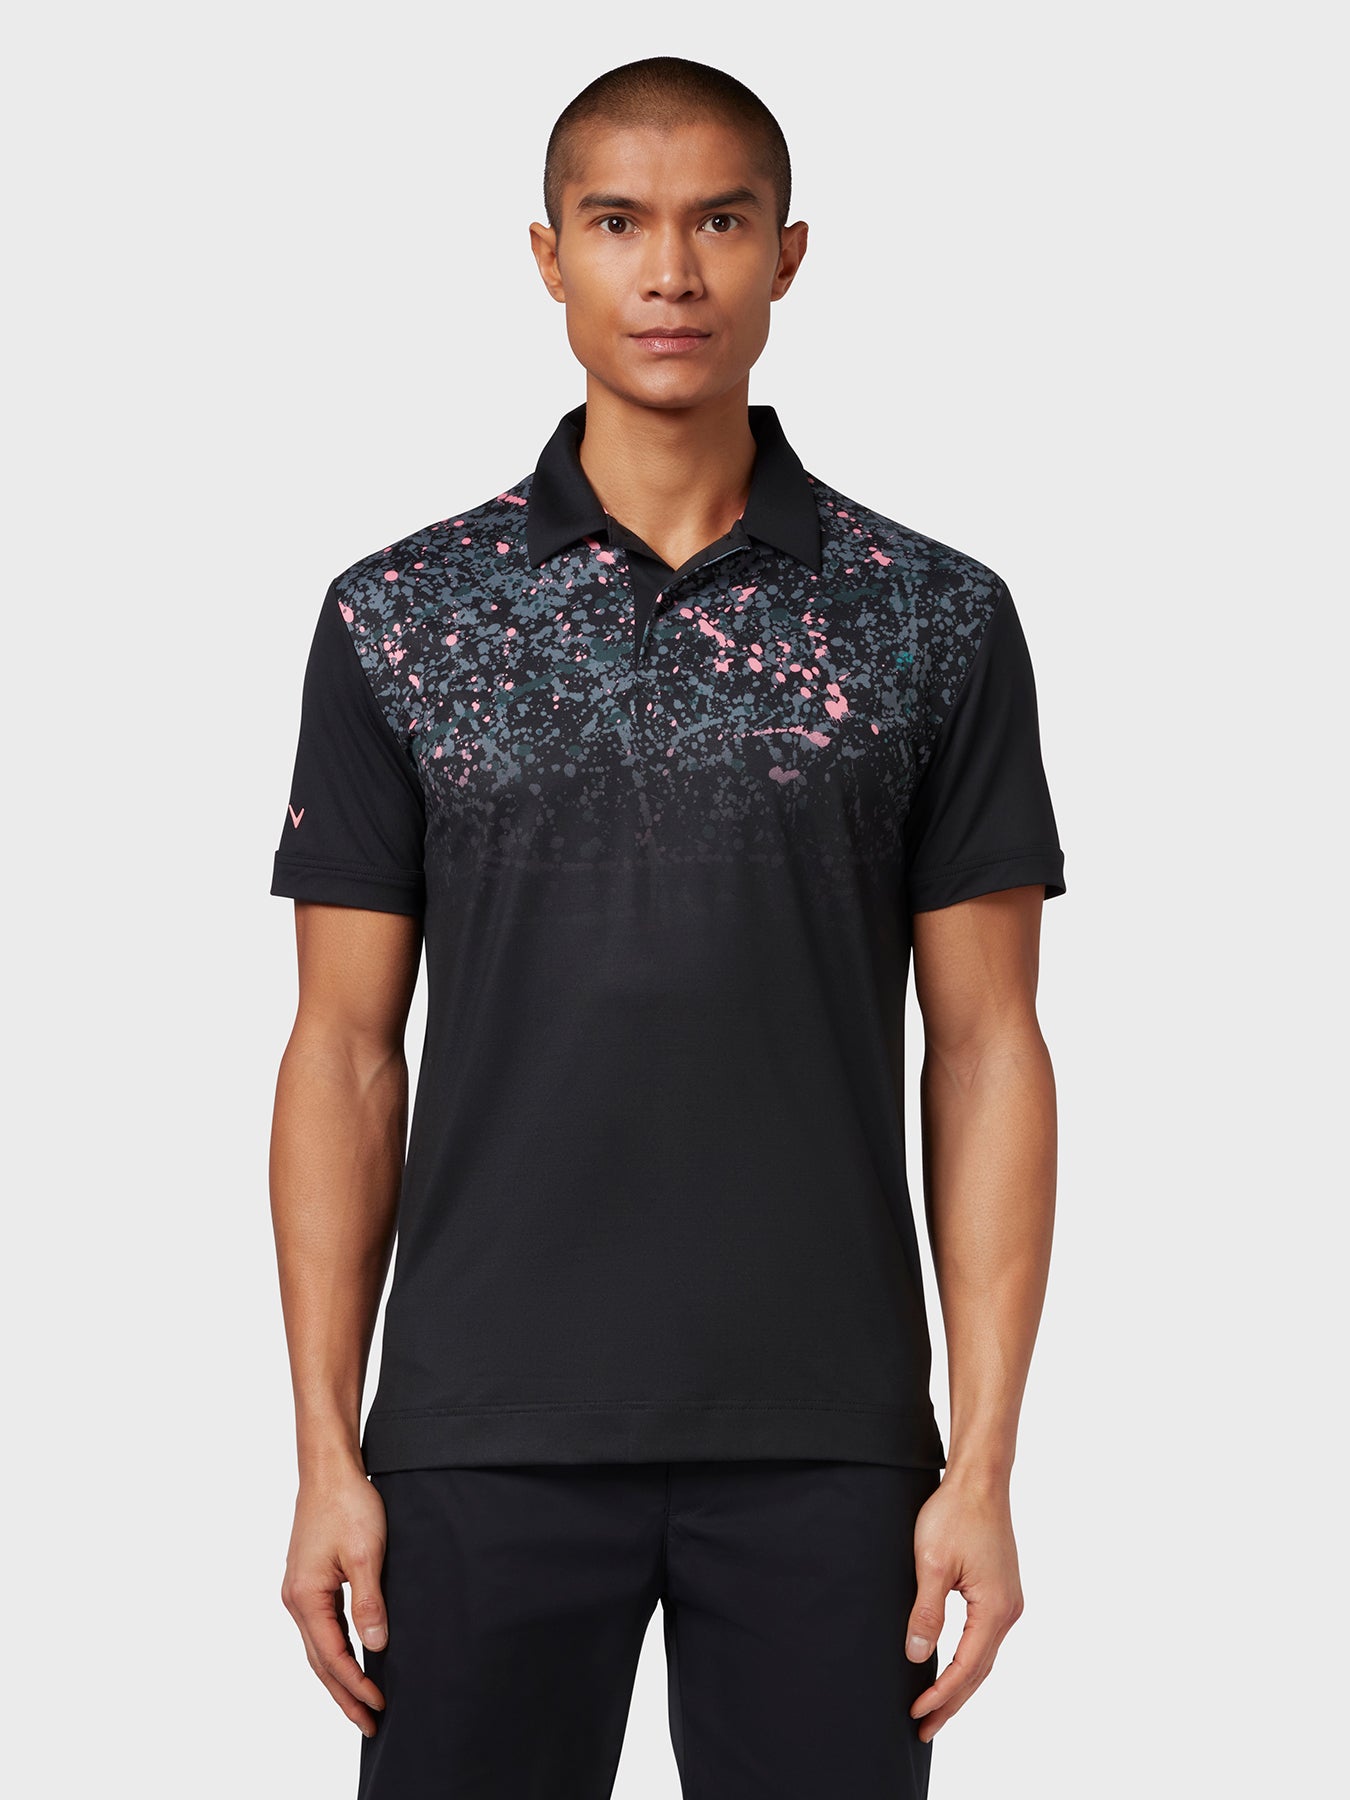 View X Series Splatter Paint Ombre Polo In Caviar Caviar M information